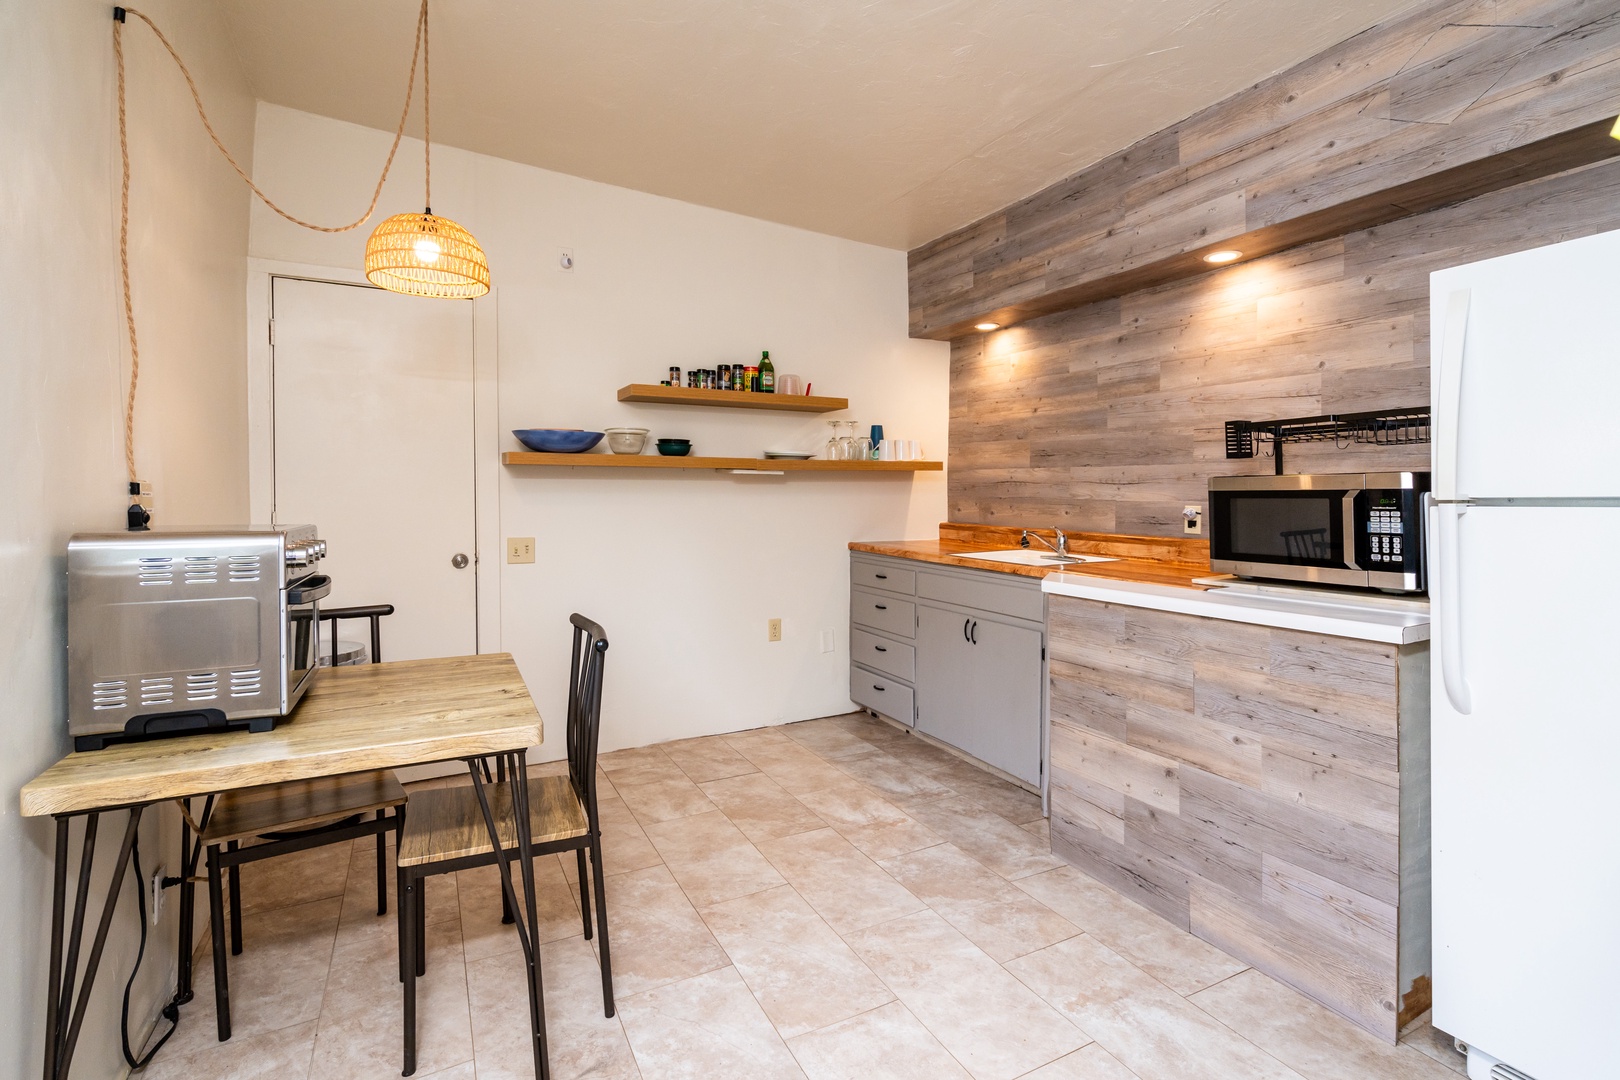 The eat-in kitchen offers a comfortable atmosphere with ample amenities